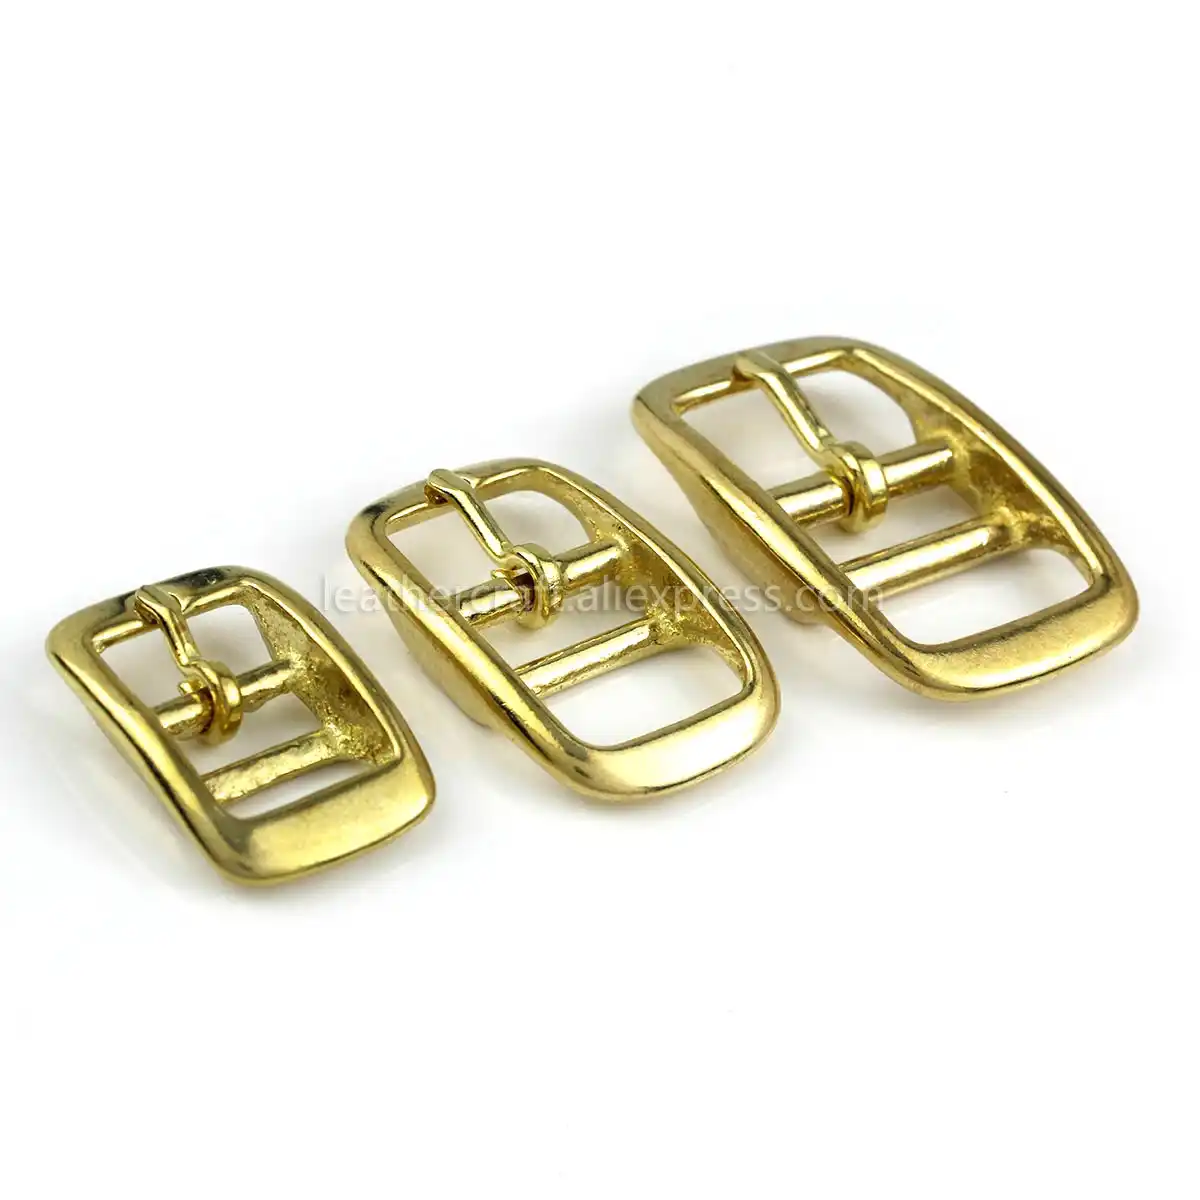 20 x Double Buckle Iceland Buckle Brass approx 13mm